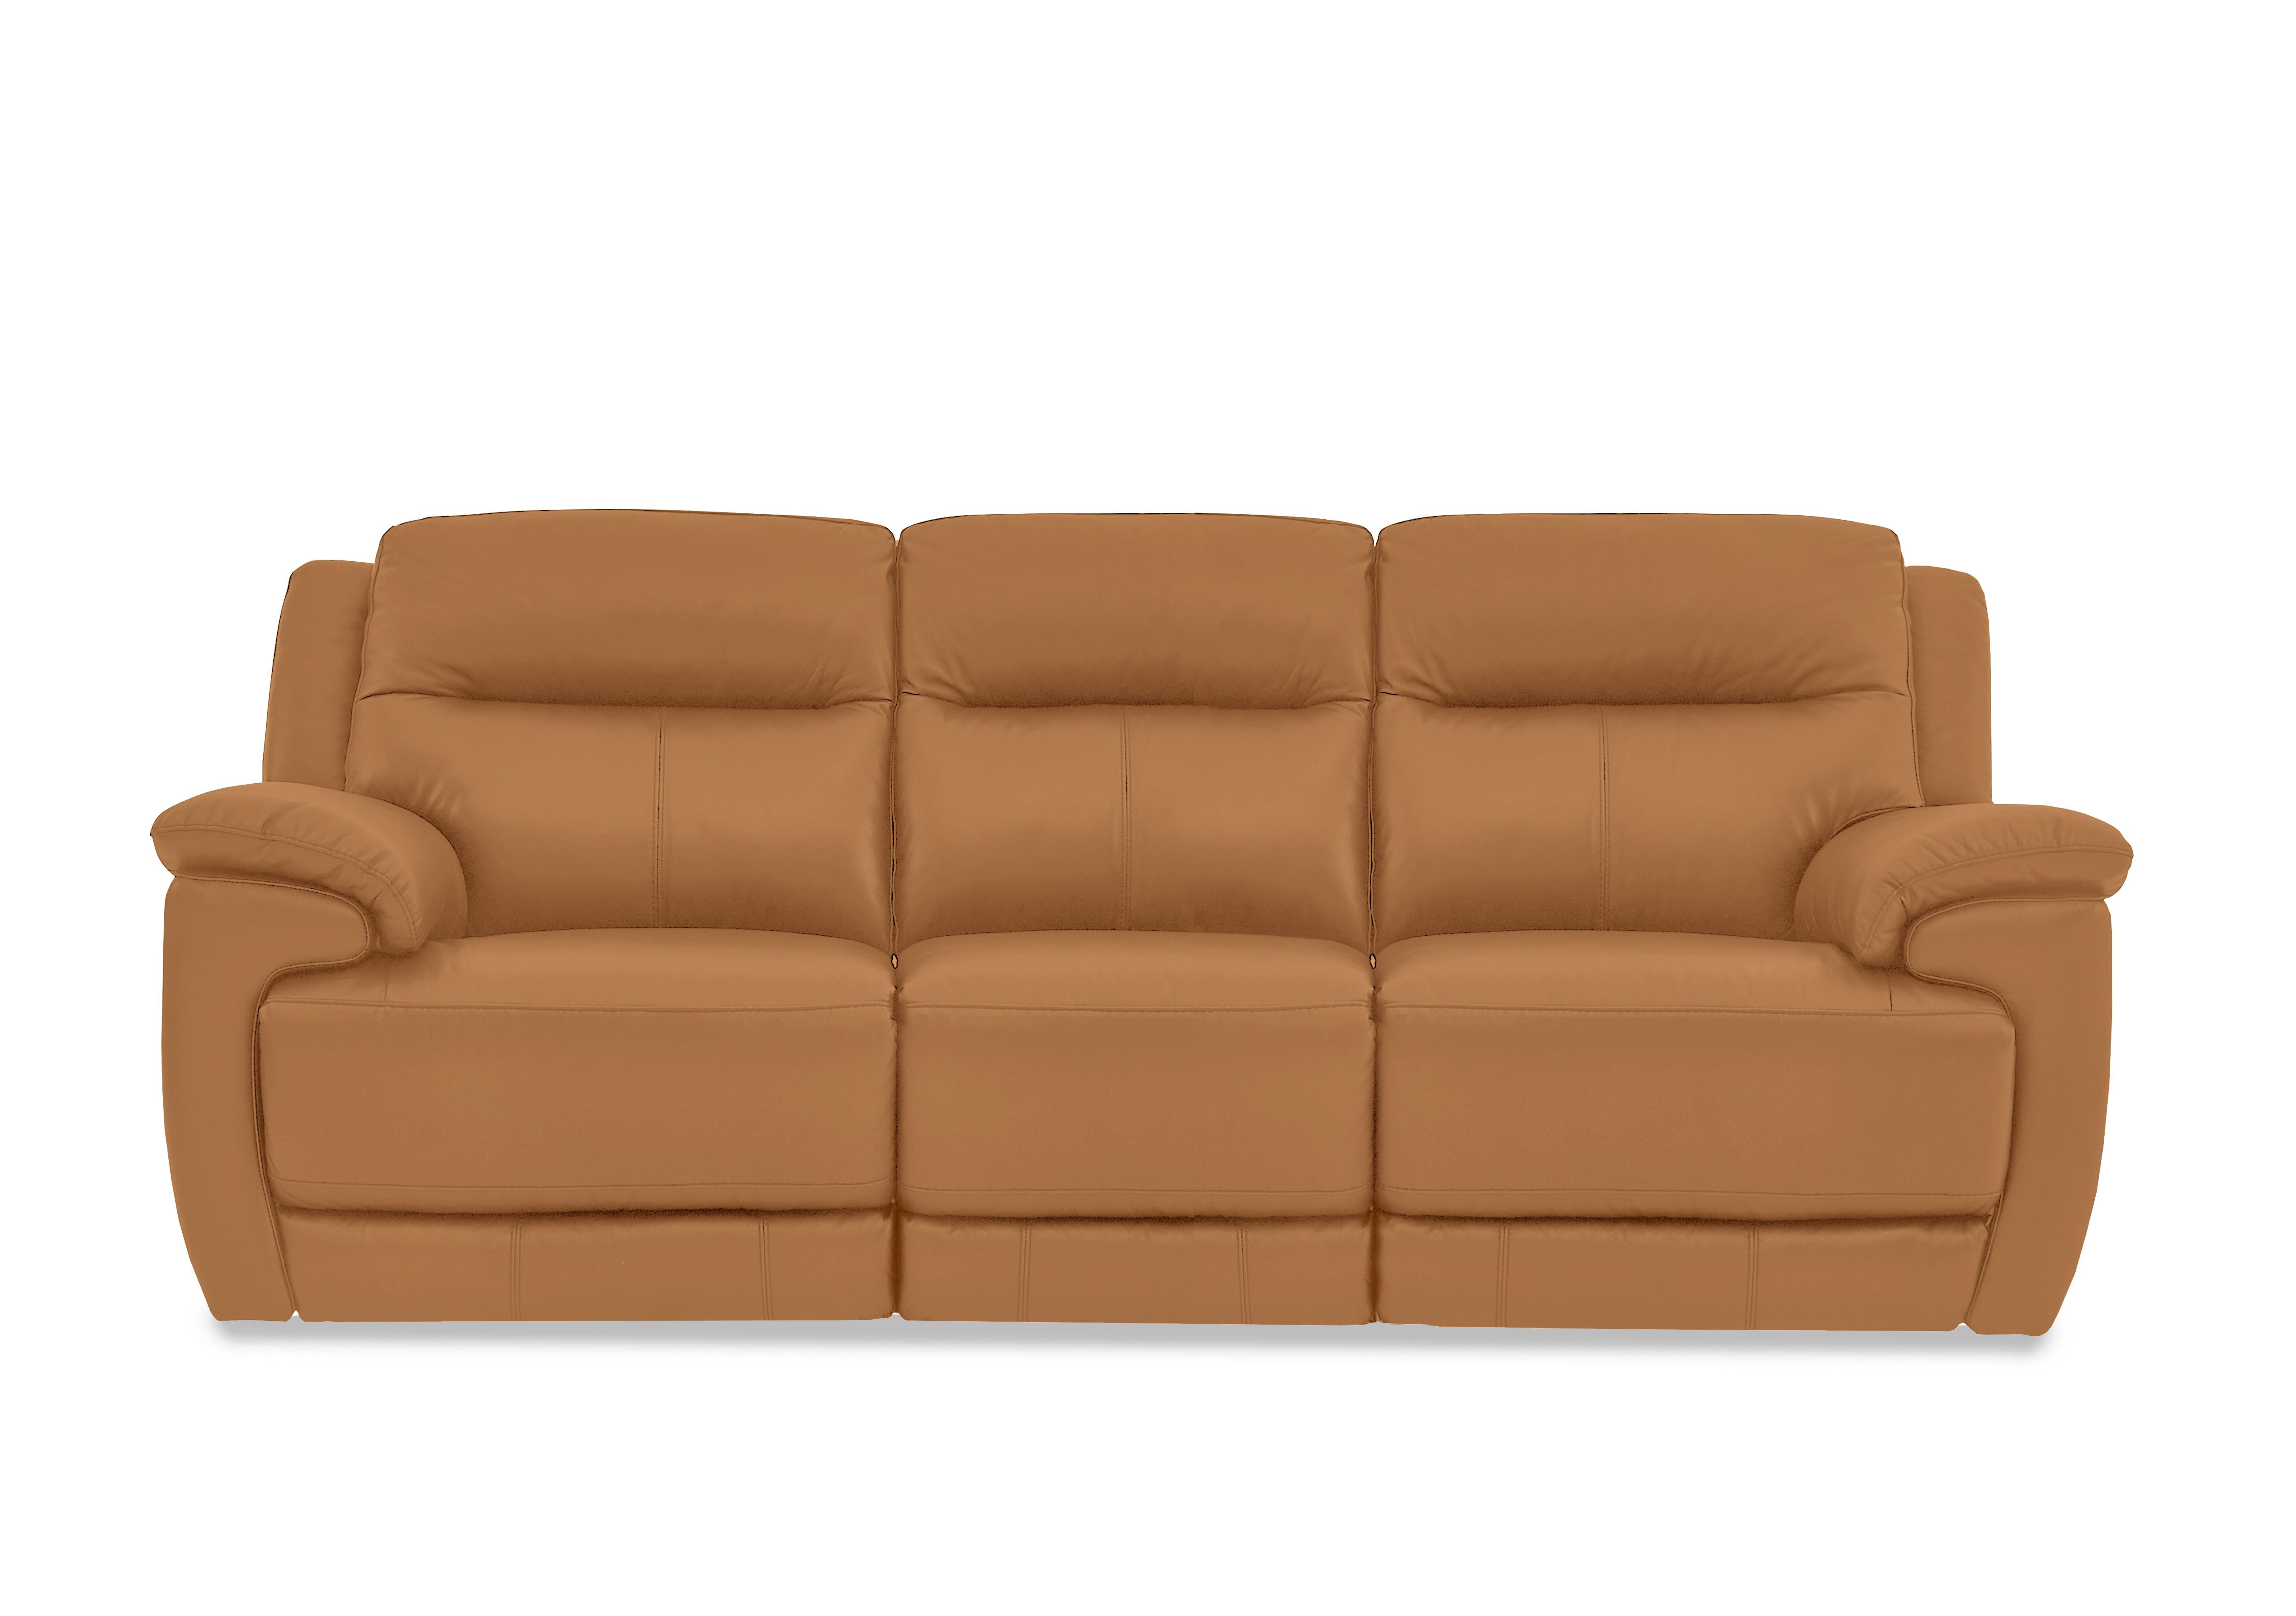 Touch 3 Seater Leather Sofa in Bv-335e Honey Yellow on Furniture Village